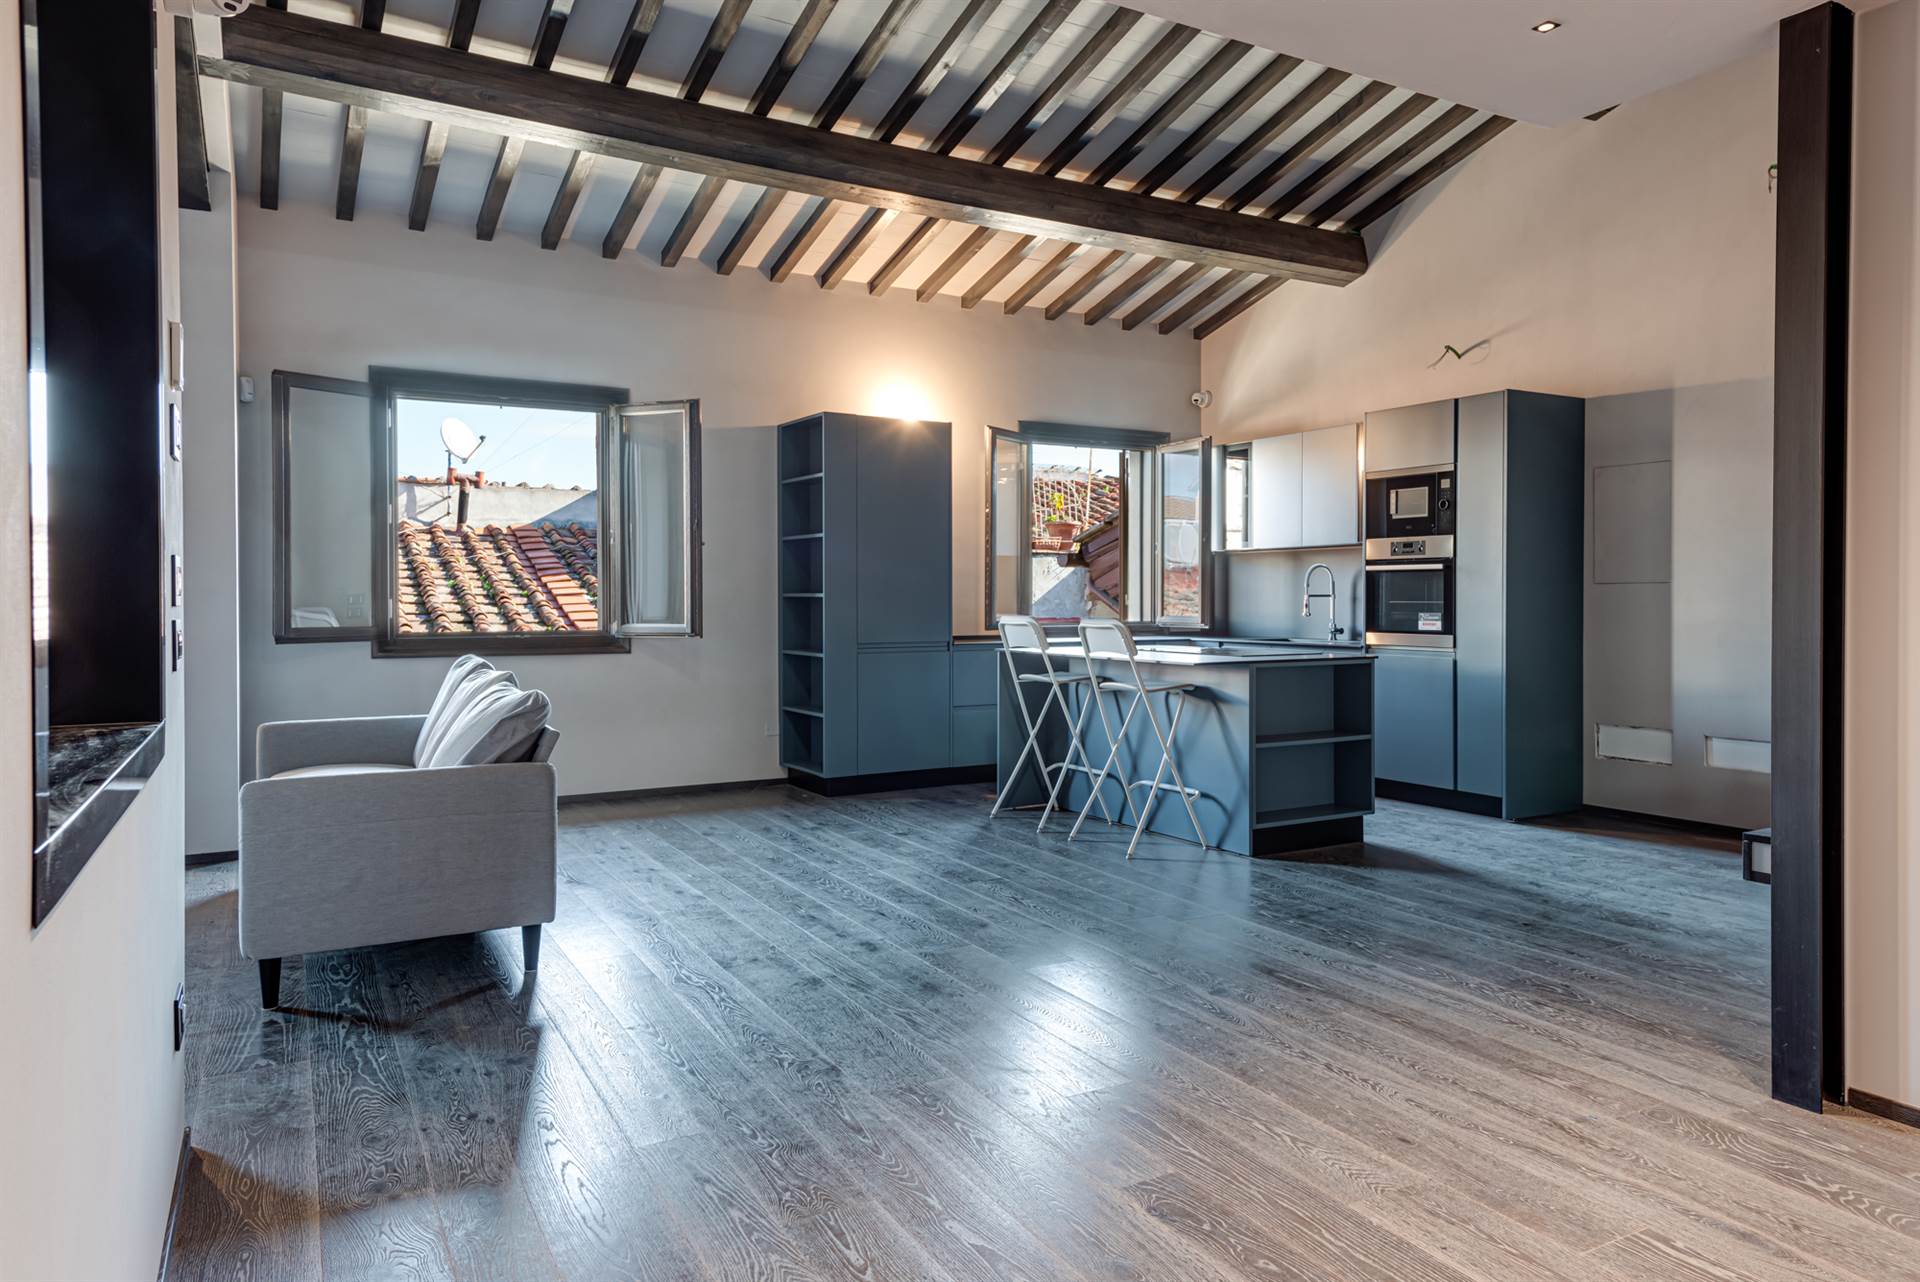 PONTE VECCHIO, FIRENZE, Penthouse for sale of 120 Sq. mt., Restored, Heating Individual heating system, Energetic class: A2, placed at 5° on 6, 